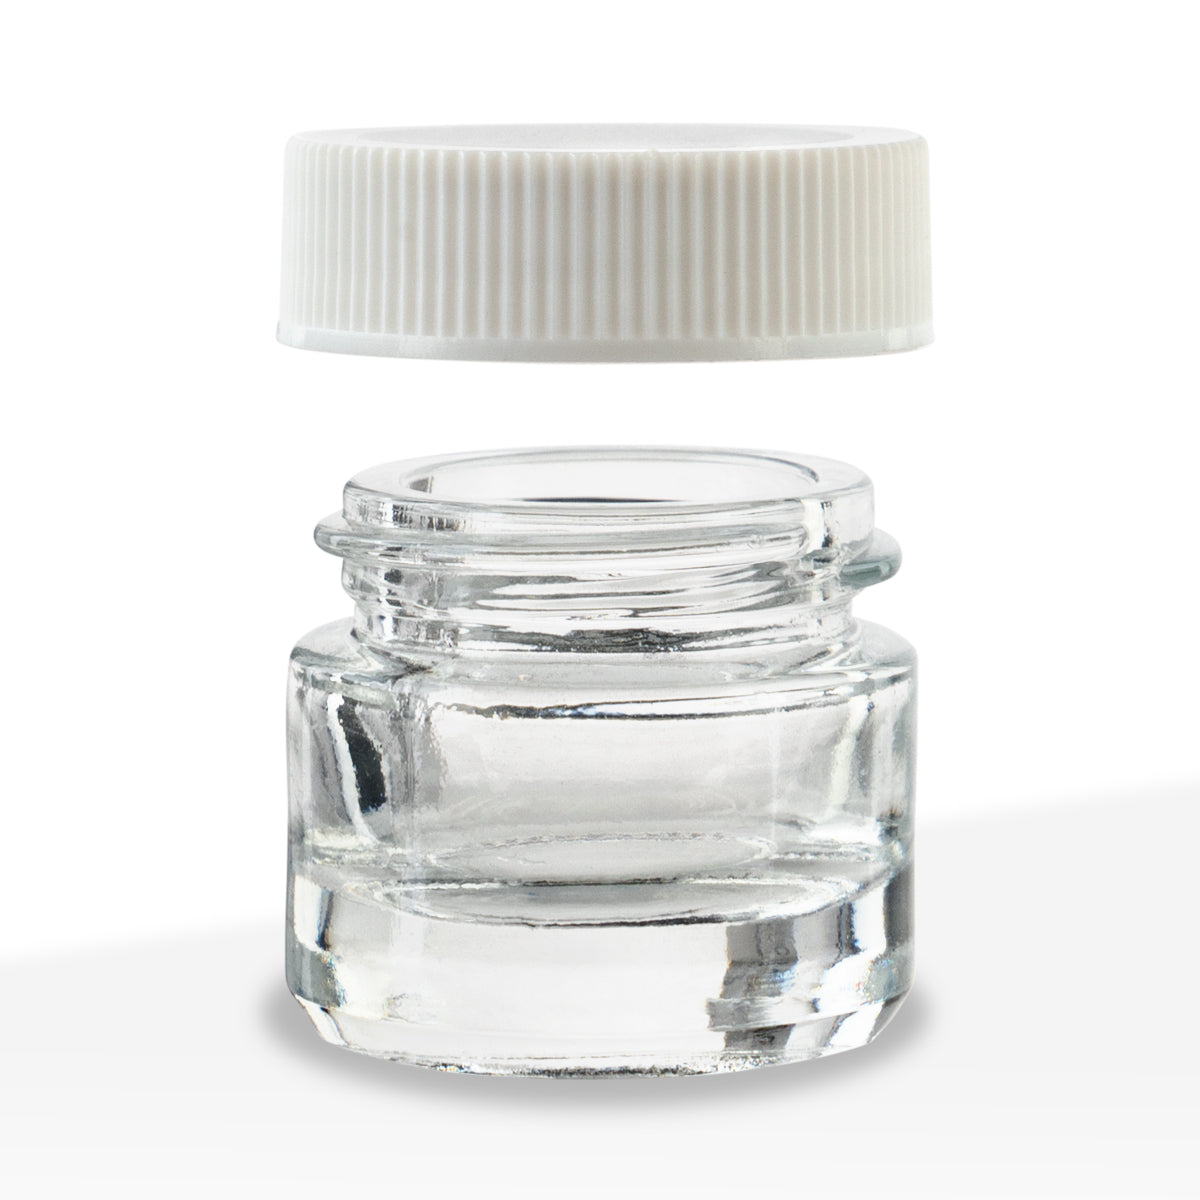 Concentrate Containers | Clear Glass Concentrate Containers w/ White Caps | 5ml - 250 Count